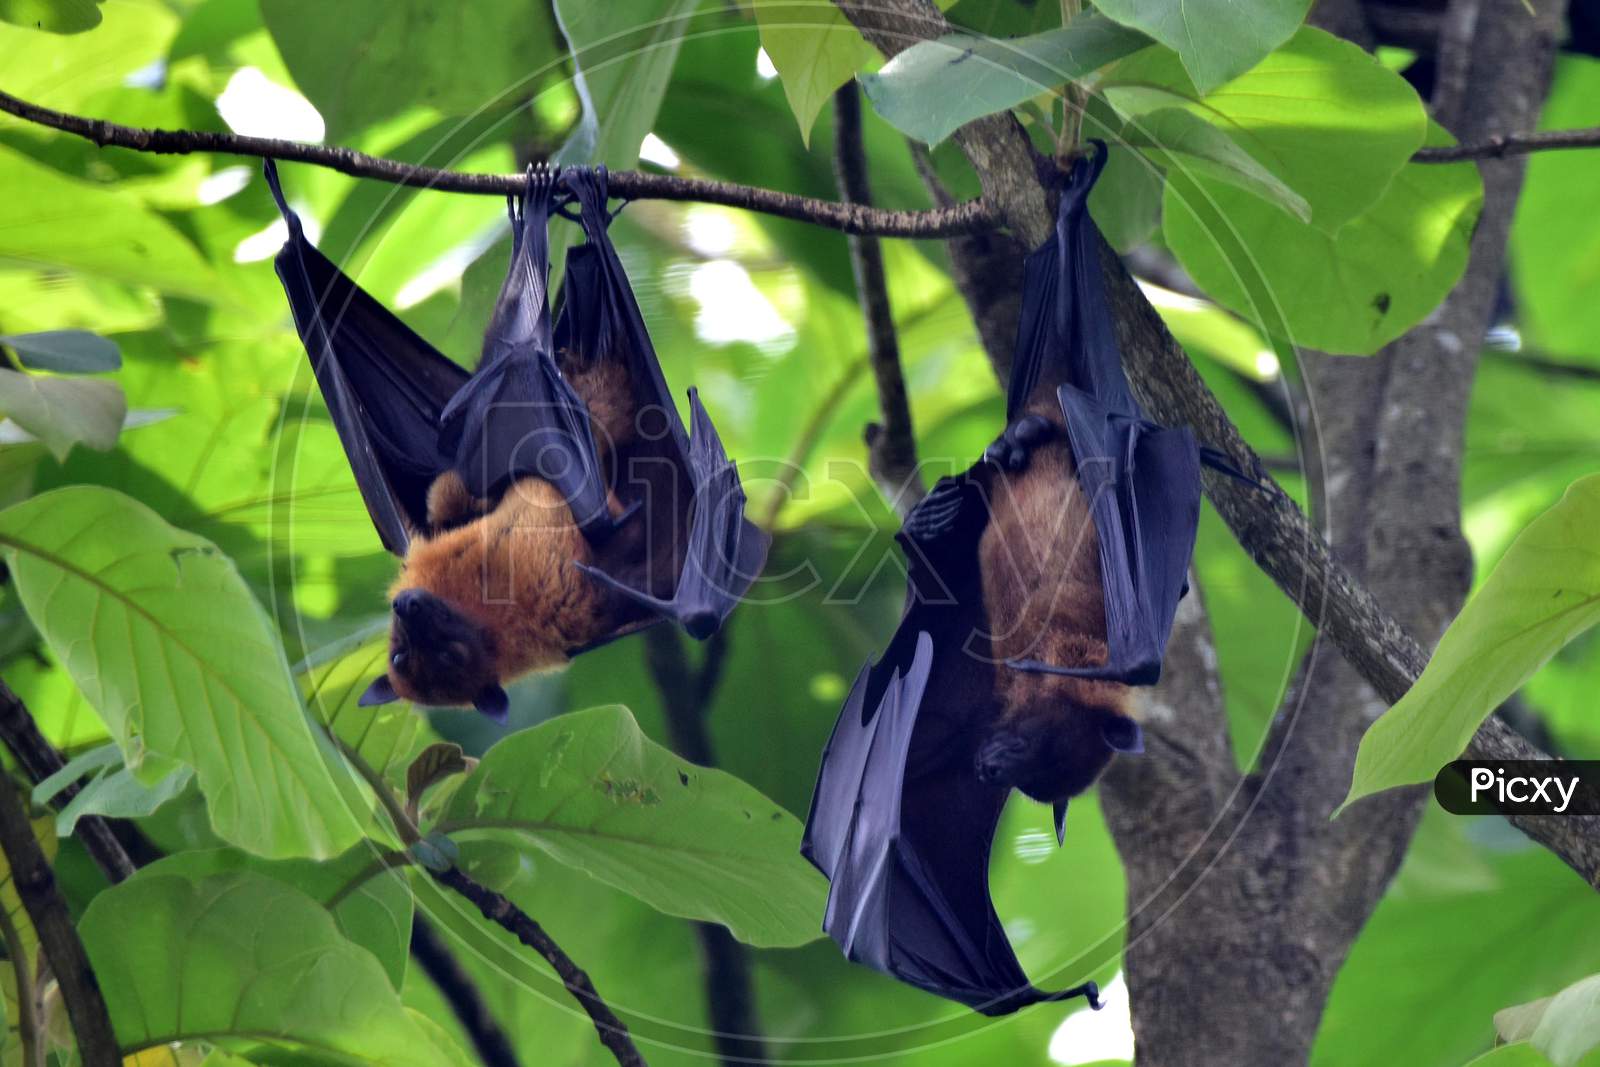 Bats Take Rest On Trees In Nagaon District Of Assam On June 07,2020